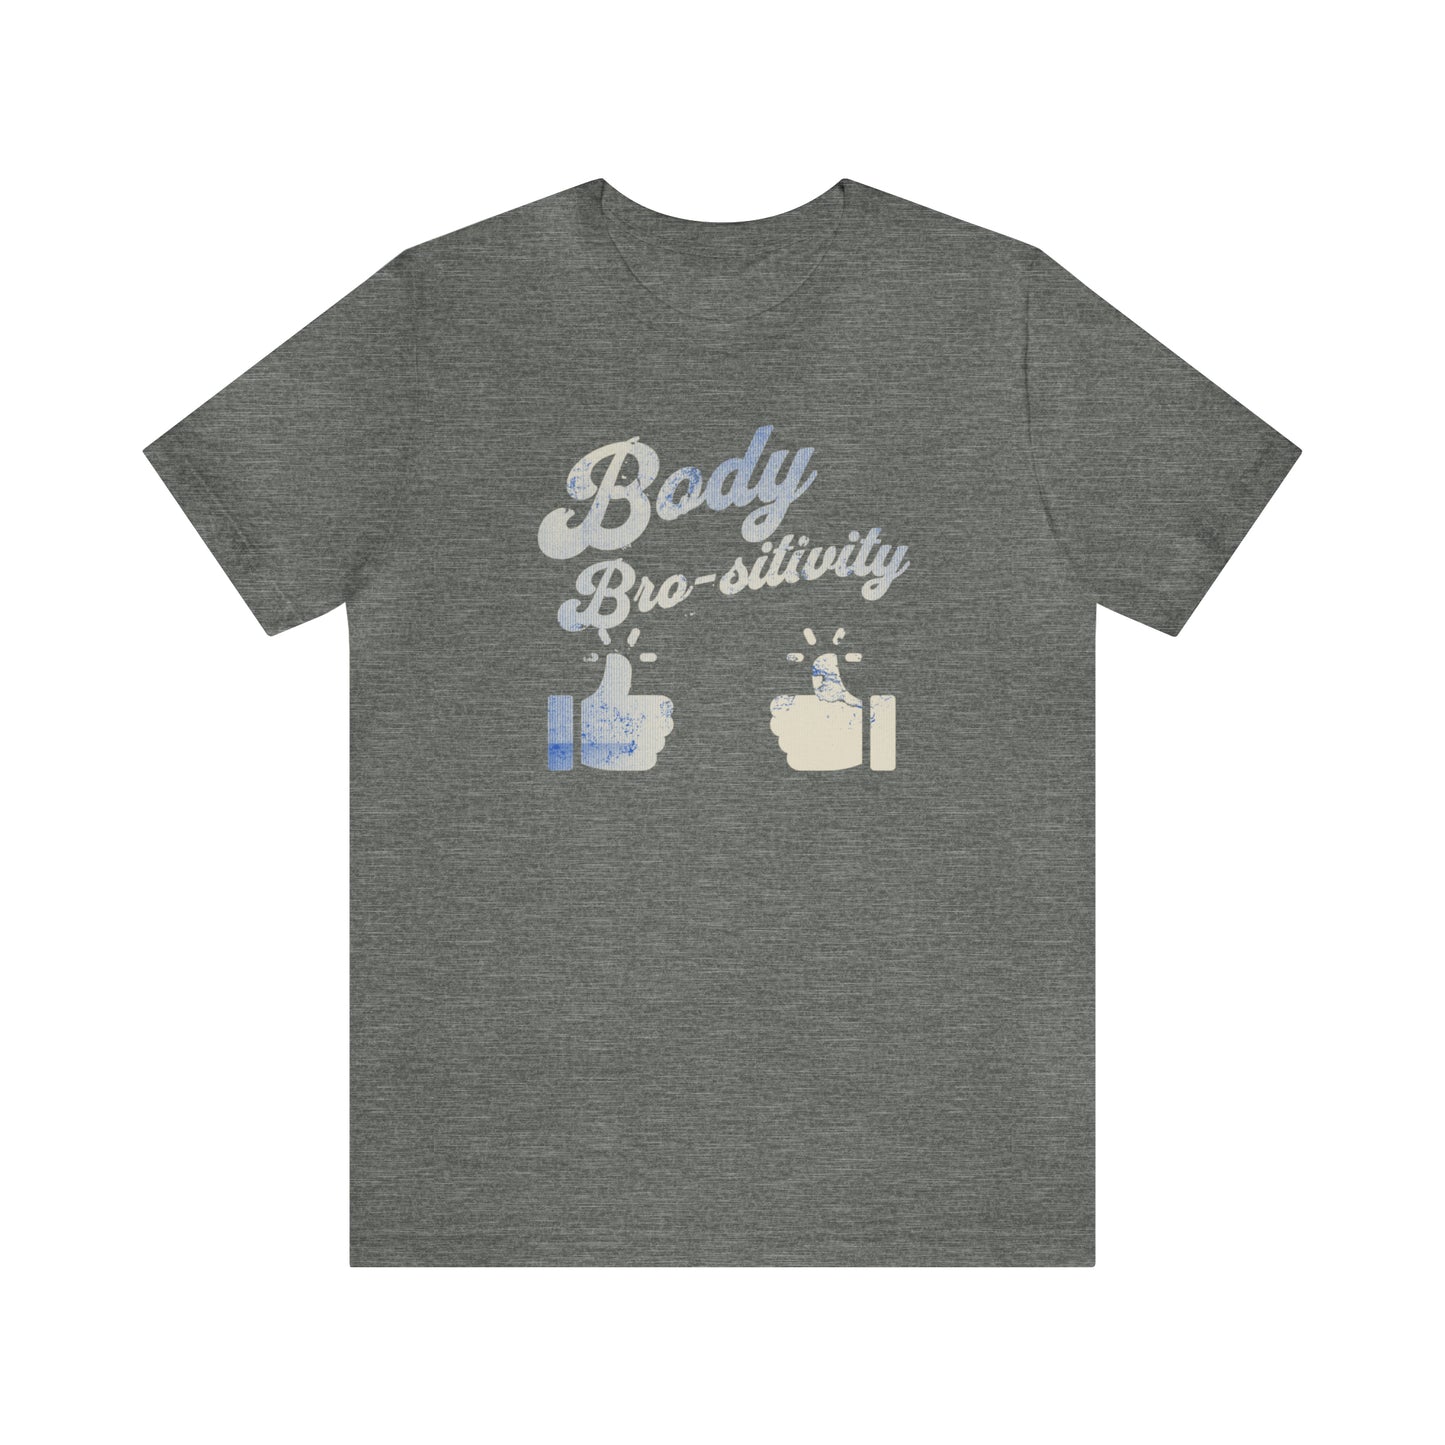 Body Bro-sitivity Unisex Jersey Short Sleeve Tee, Gym Motivation Shirt, Humorous Graphic T-shirt, Gift for Gym Enthusiast, Trendy Urban Top